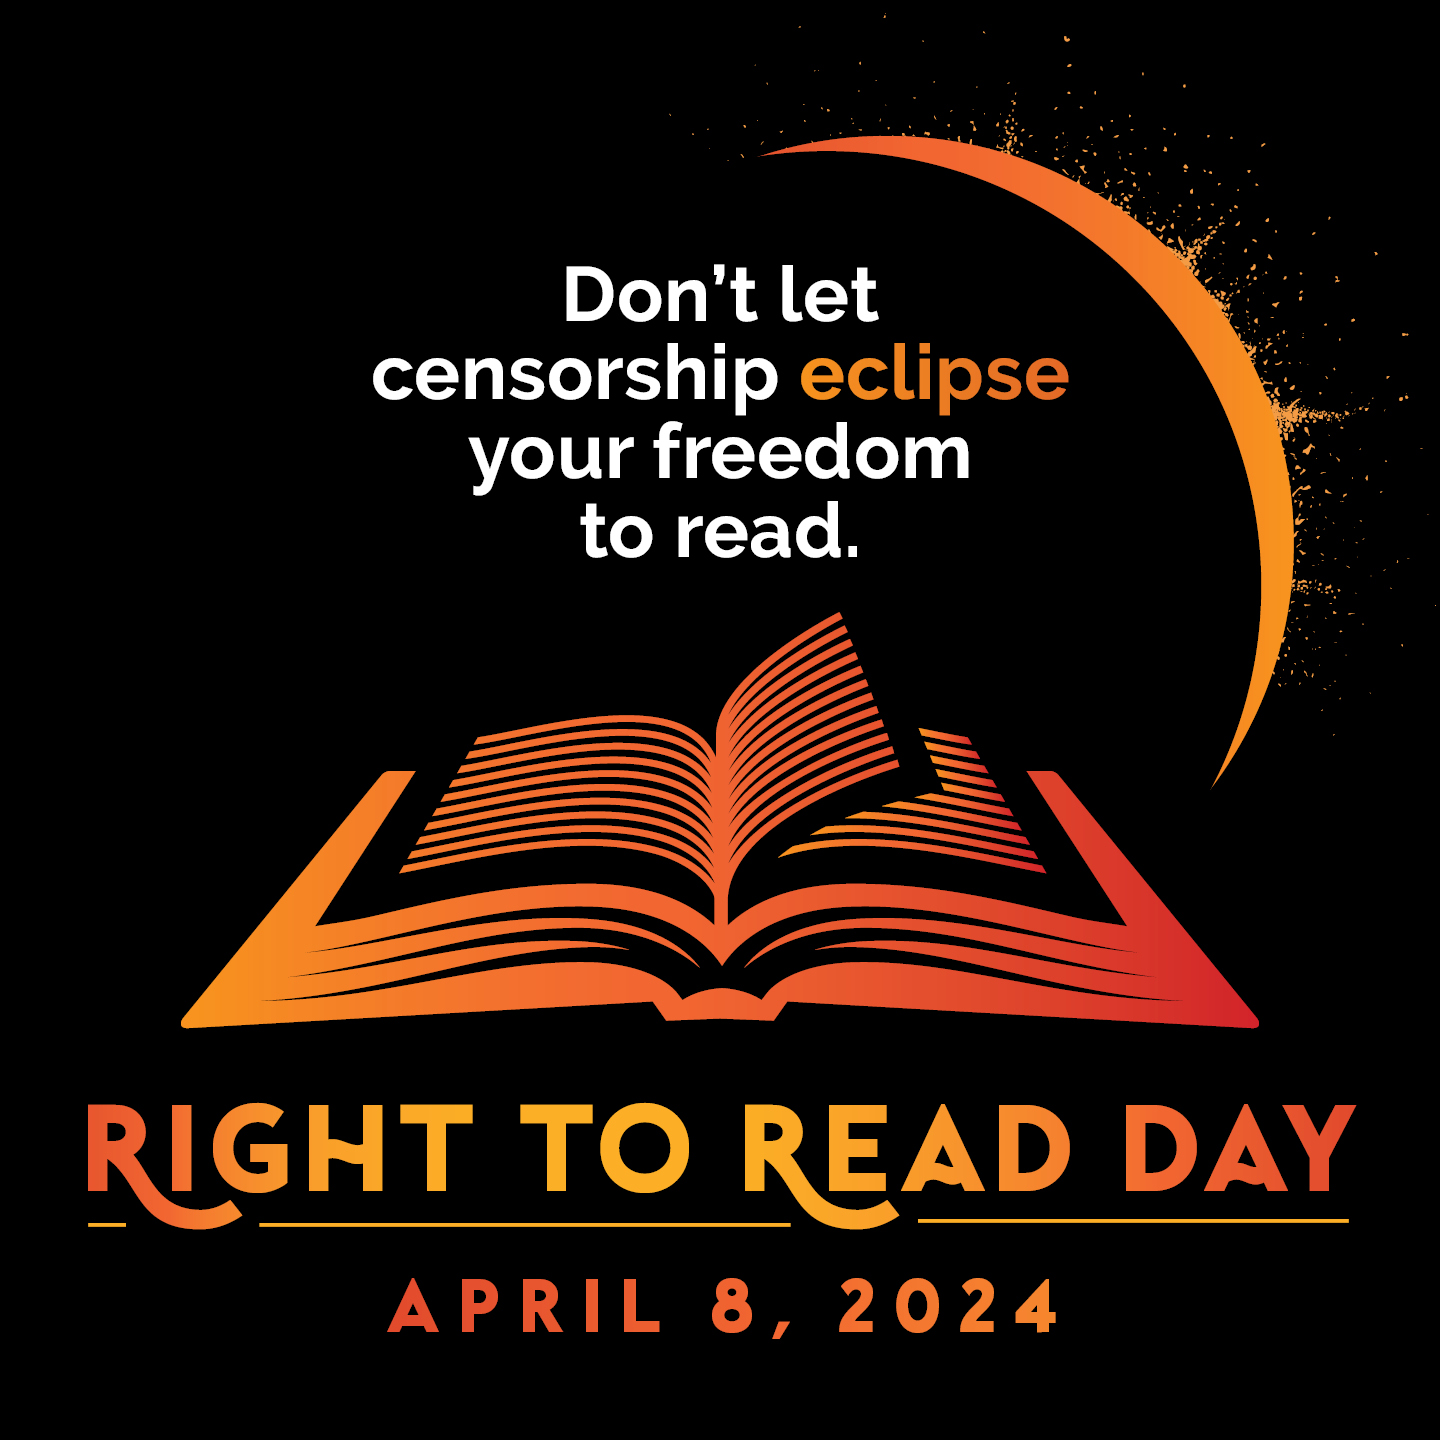 Don't let censorship eclipse your freedom to read. RIGHT TO READ DAY, April 8, 2024.